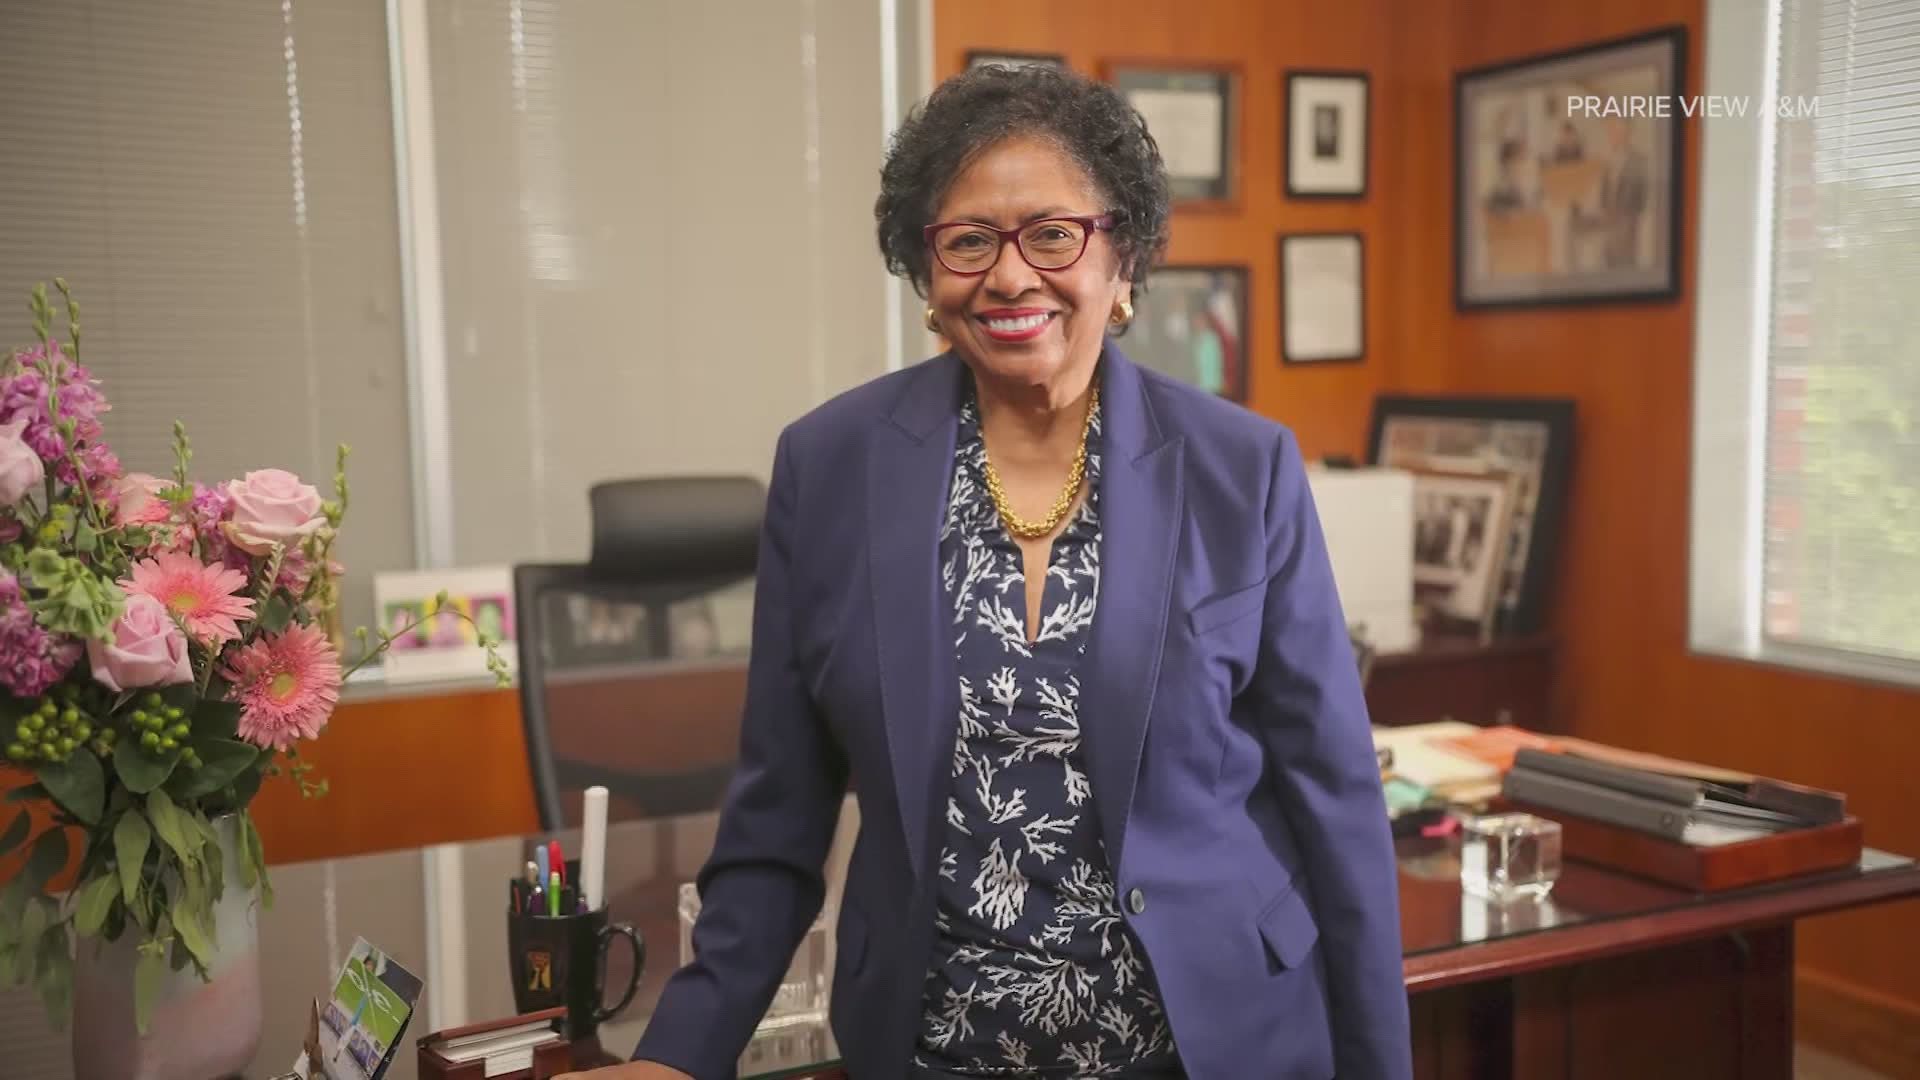 After the death of George Floyd, she created the Ruth J. Simmons Center for Race and Justice on campus.